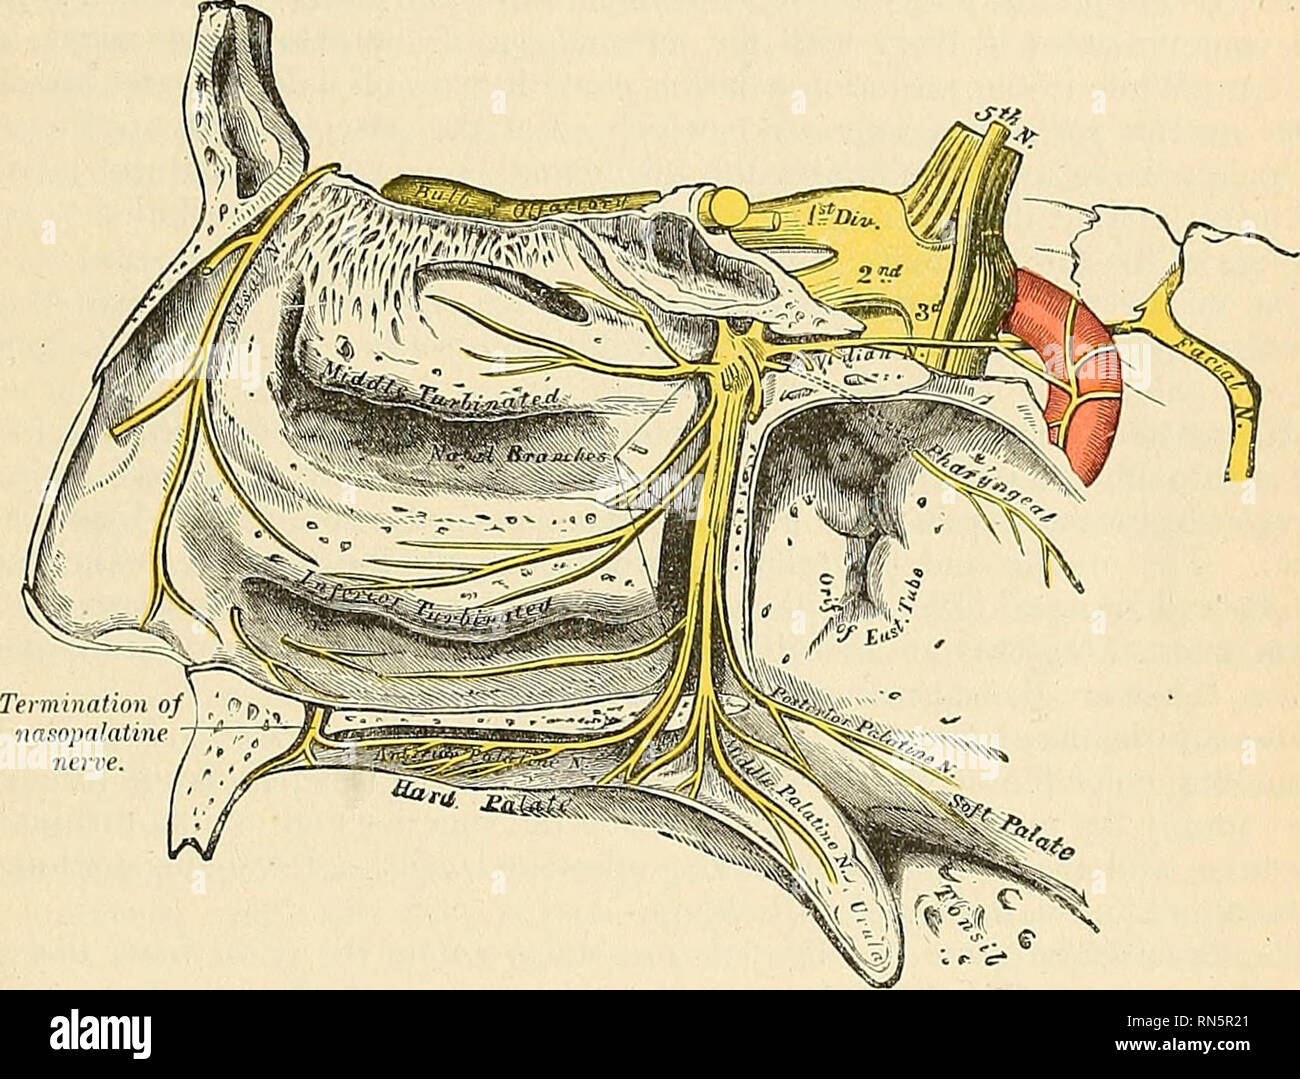 . Anatomy, descriptive and applied. Anatomy. THE FIFTH, TRIGEMINAL, OR TRIFACIAL NERVE 985 enter the ganglion, constituting its sensor root. Its motor root is derived from tlie facial nerve through the large superficial petrosal nerve, and its sympathetic root from the carotid plexus, through the large deep petrosal nerve. These two nerves join together before their entrance into the ganglion to form a single nerve, the Vidian. The large or great superficial petrosal branch (h. petrosus superficialis major) (Fig. 744) is given off from tlie geniculate ganglion implanted on the external genu of Stock Photo